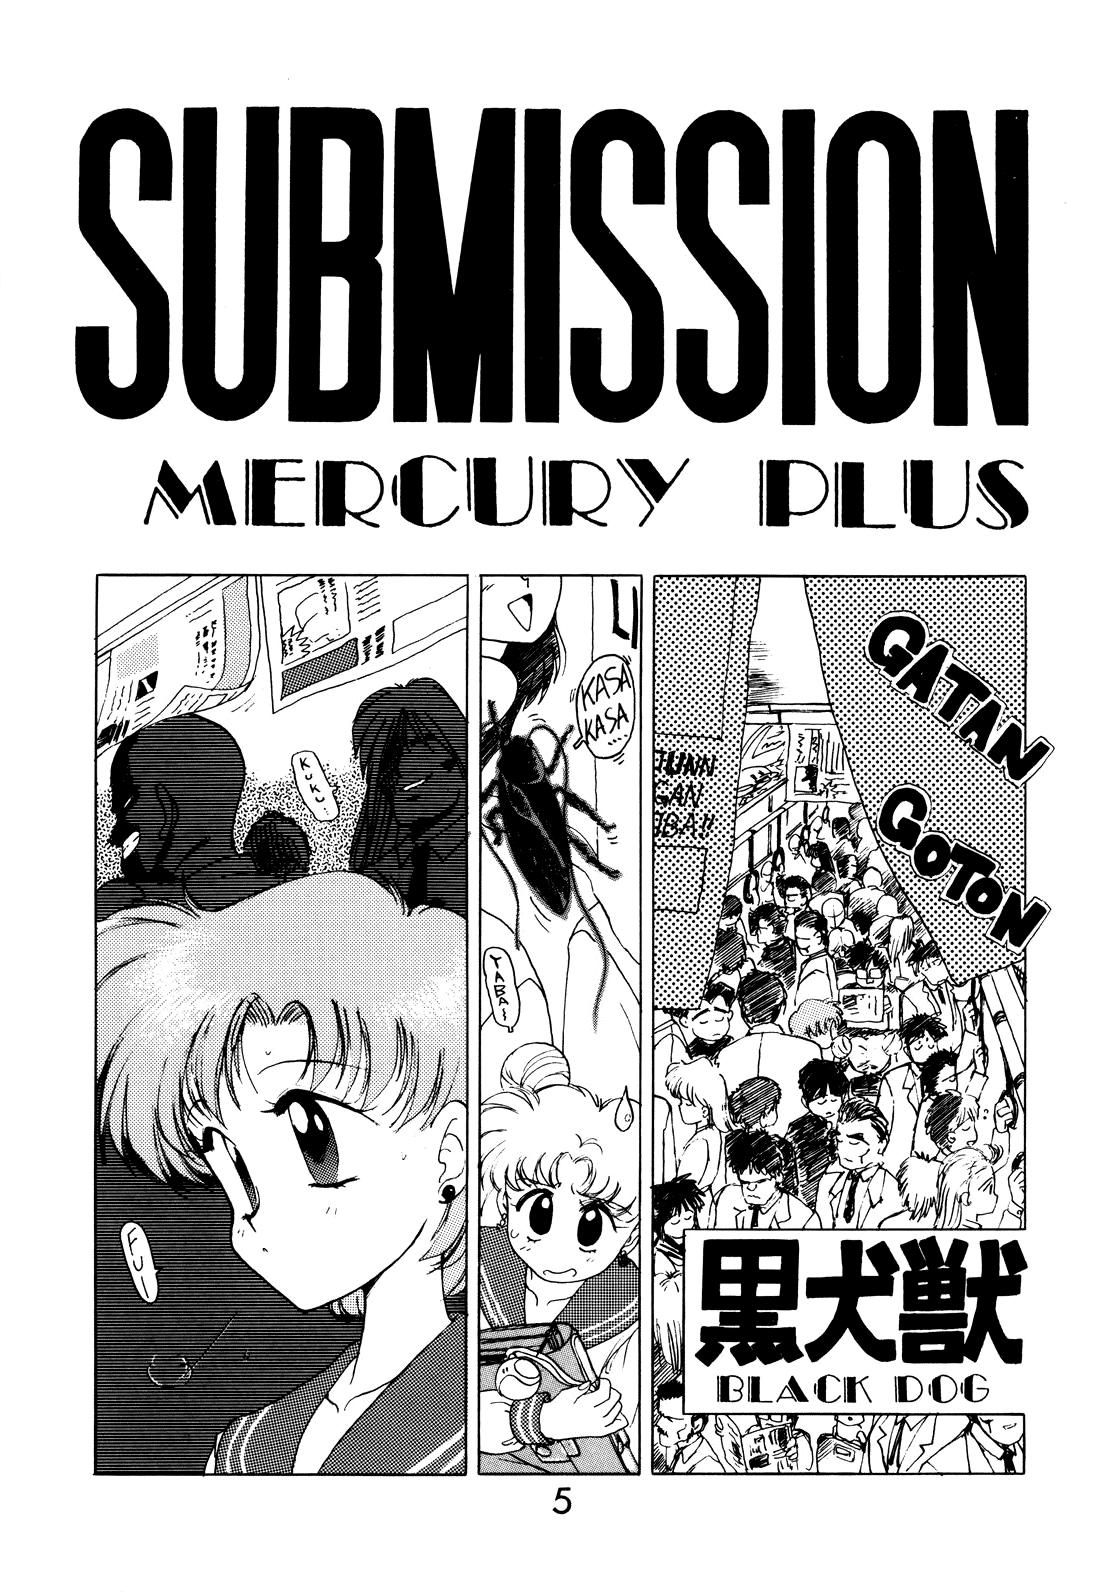 Gay Facial Submission Mercury Plus - Sailor moon Body - Page 4